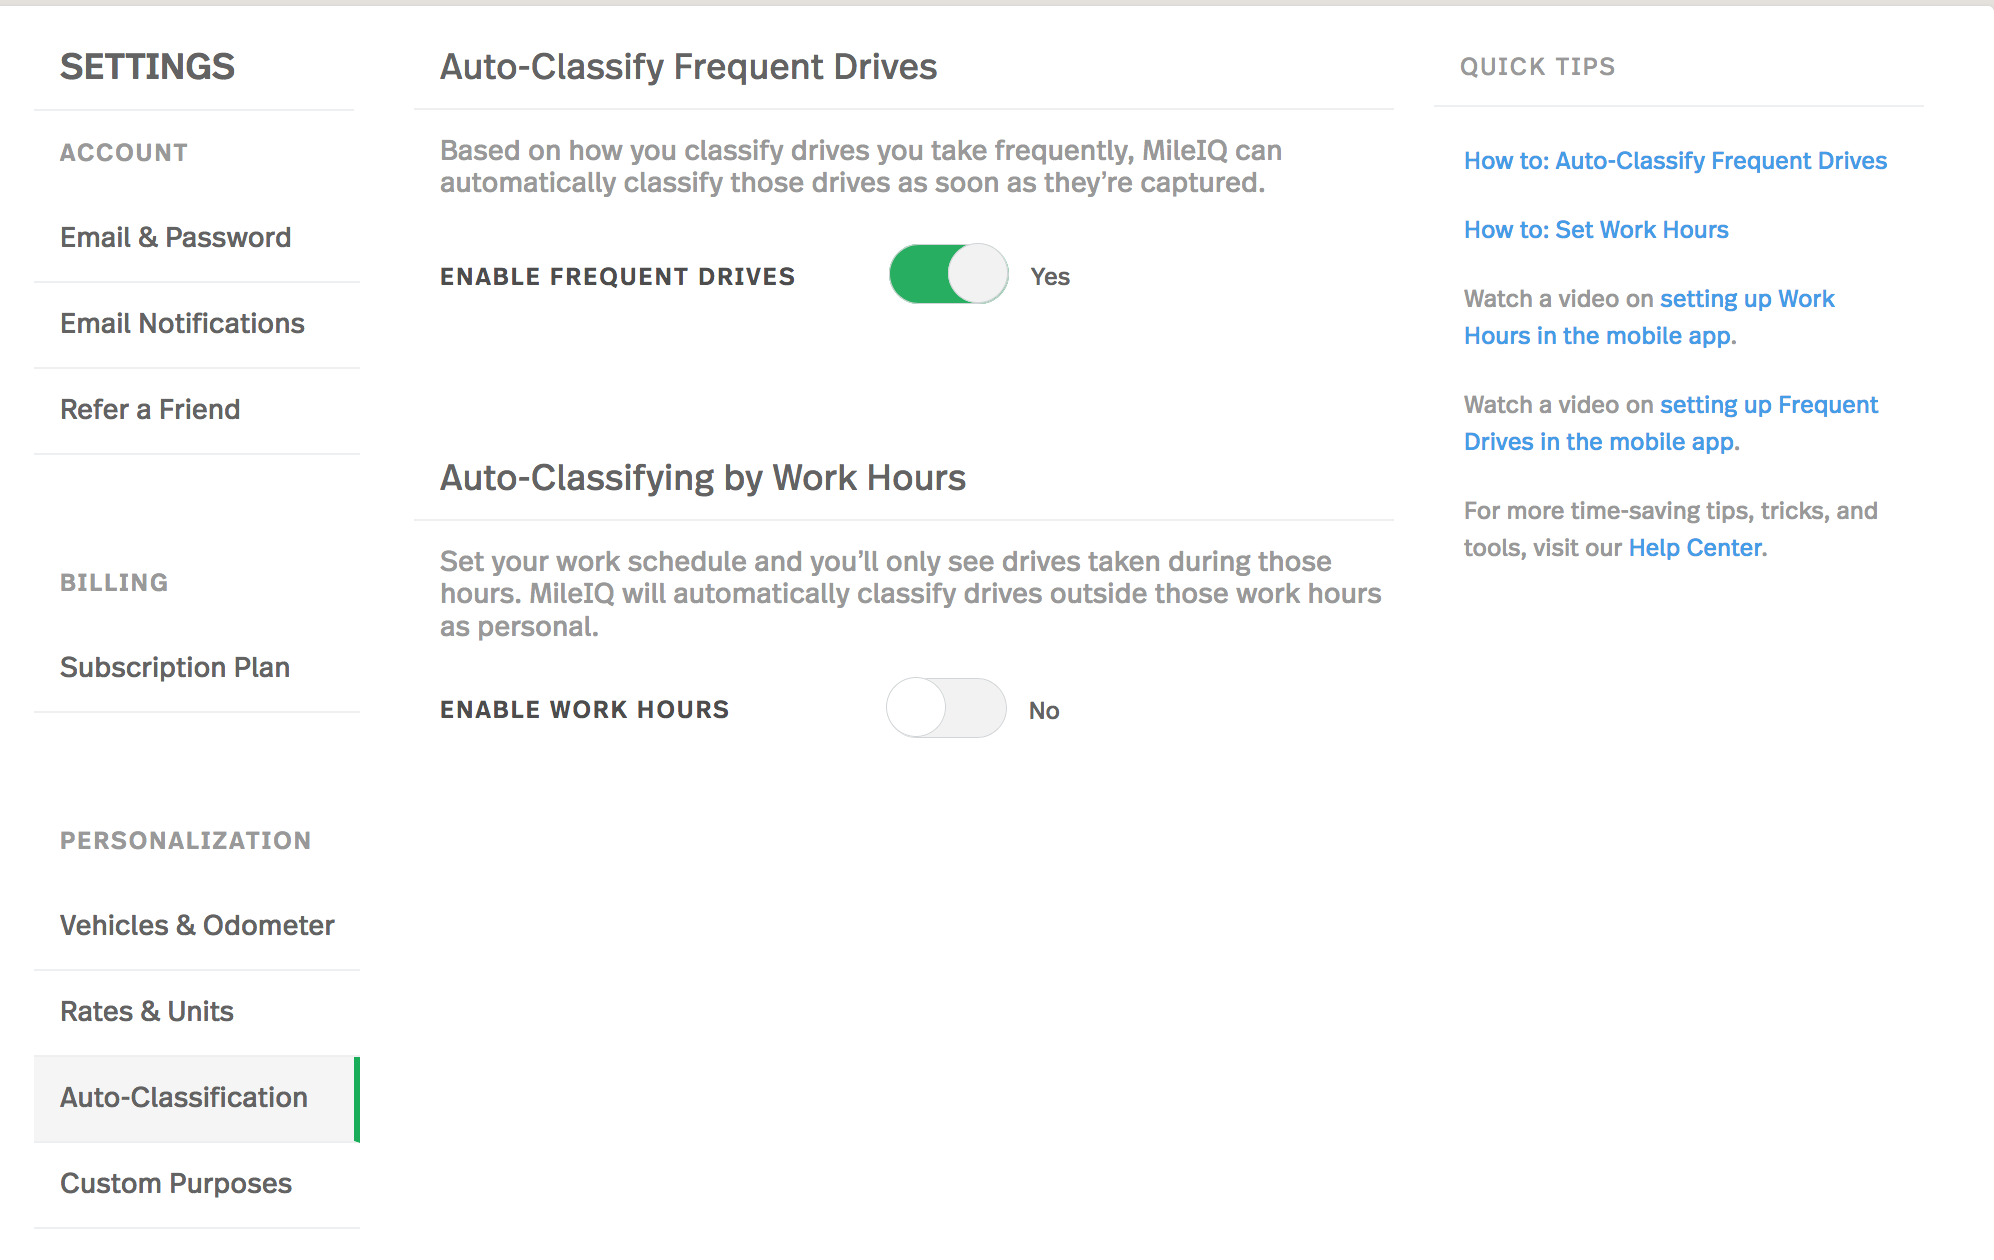 Screenshot of the inside interface of our MileIQ account, under the 'Personalization / Auto-Classification' section, showing how a MileIQ user can Auto-Classify Frequent Drives (Auto-Classify Frequent Drives) and Auto-Classify by Work Hours (Enable work hours).